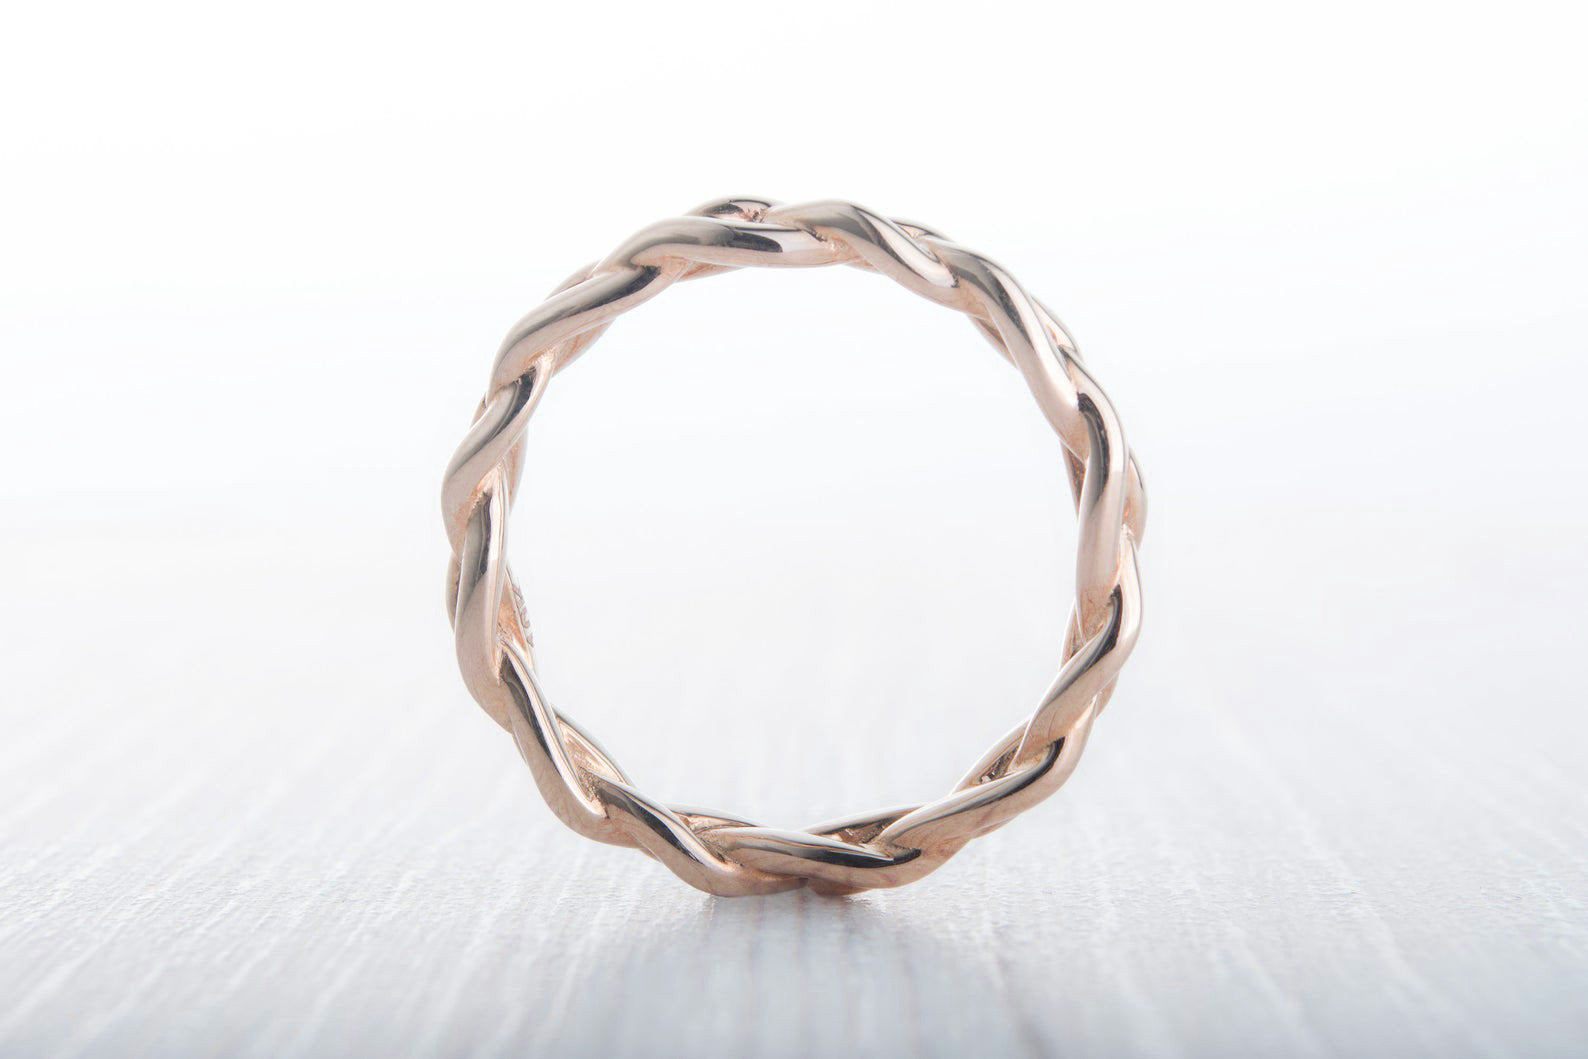 3mm Wide Braided Weave Ring in Rose Gold Filled - wedding ring